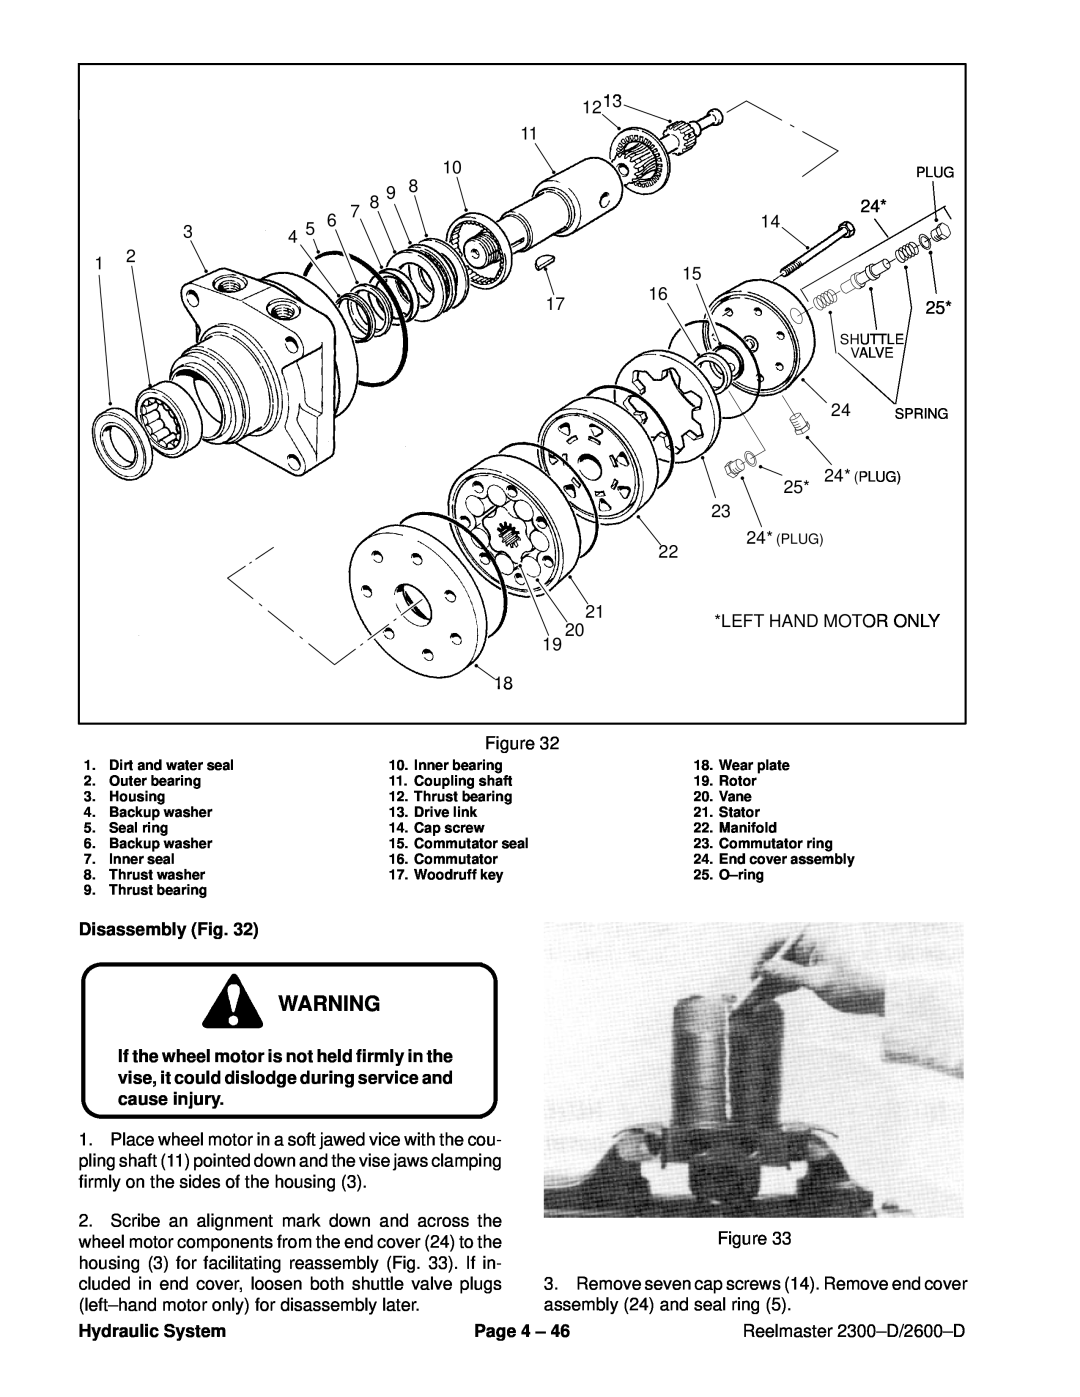 Toro 2300-D, 2600D Left Hand Motor Only, Disassembly Fig, Hydraulic System, Page 4 ±, Reelmaster 2300±D/2600±D 